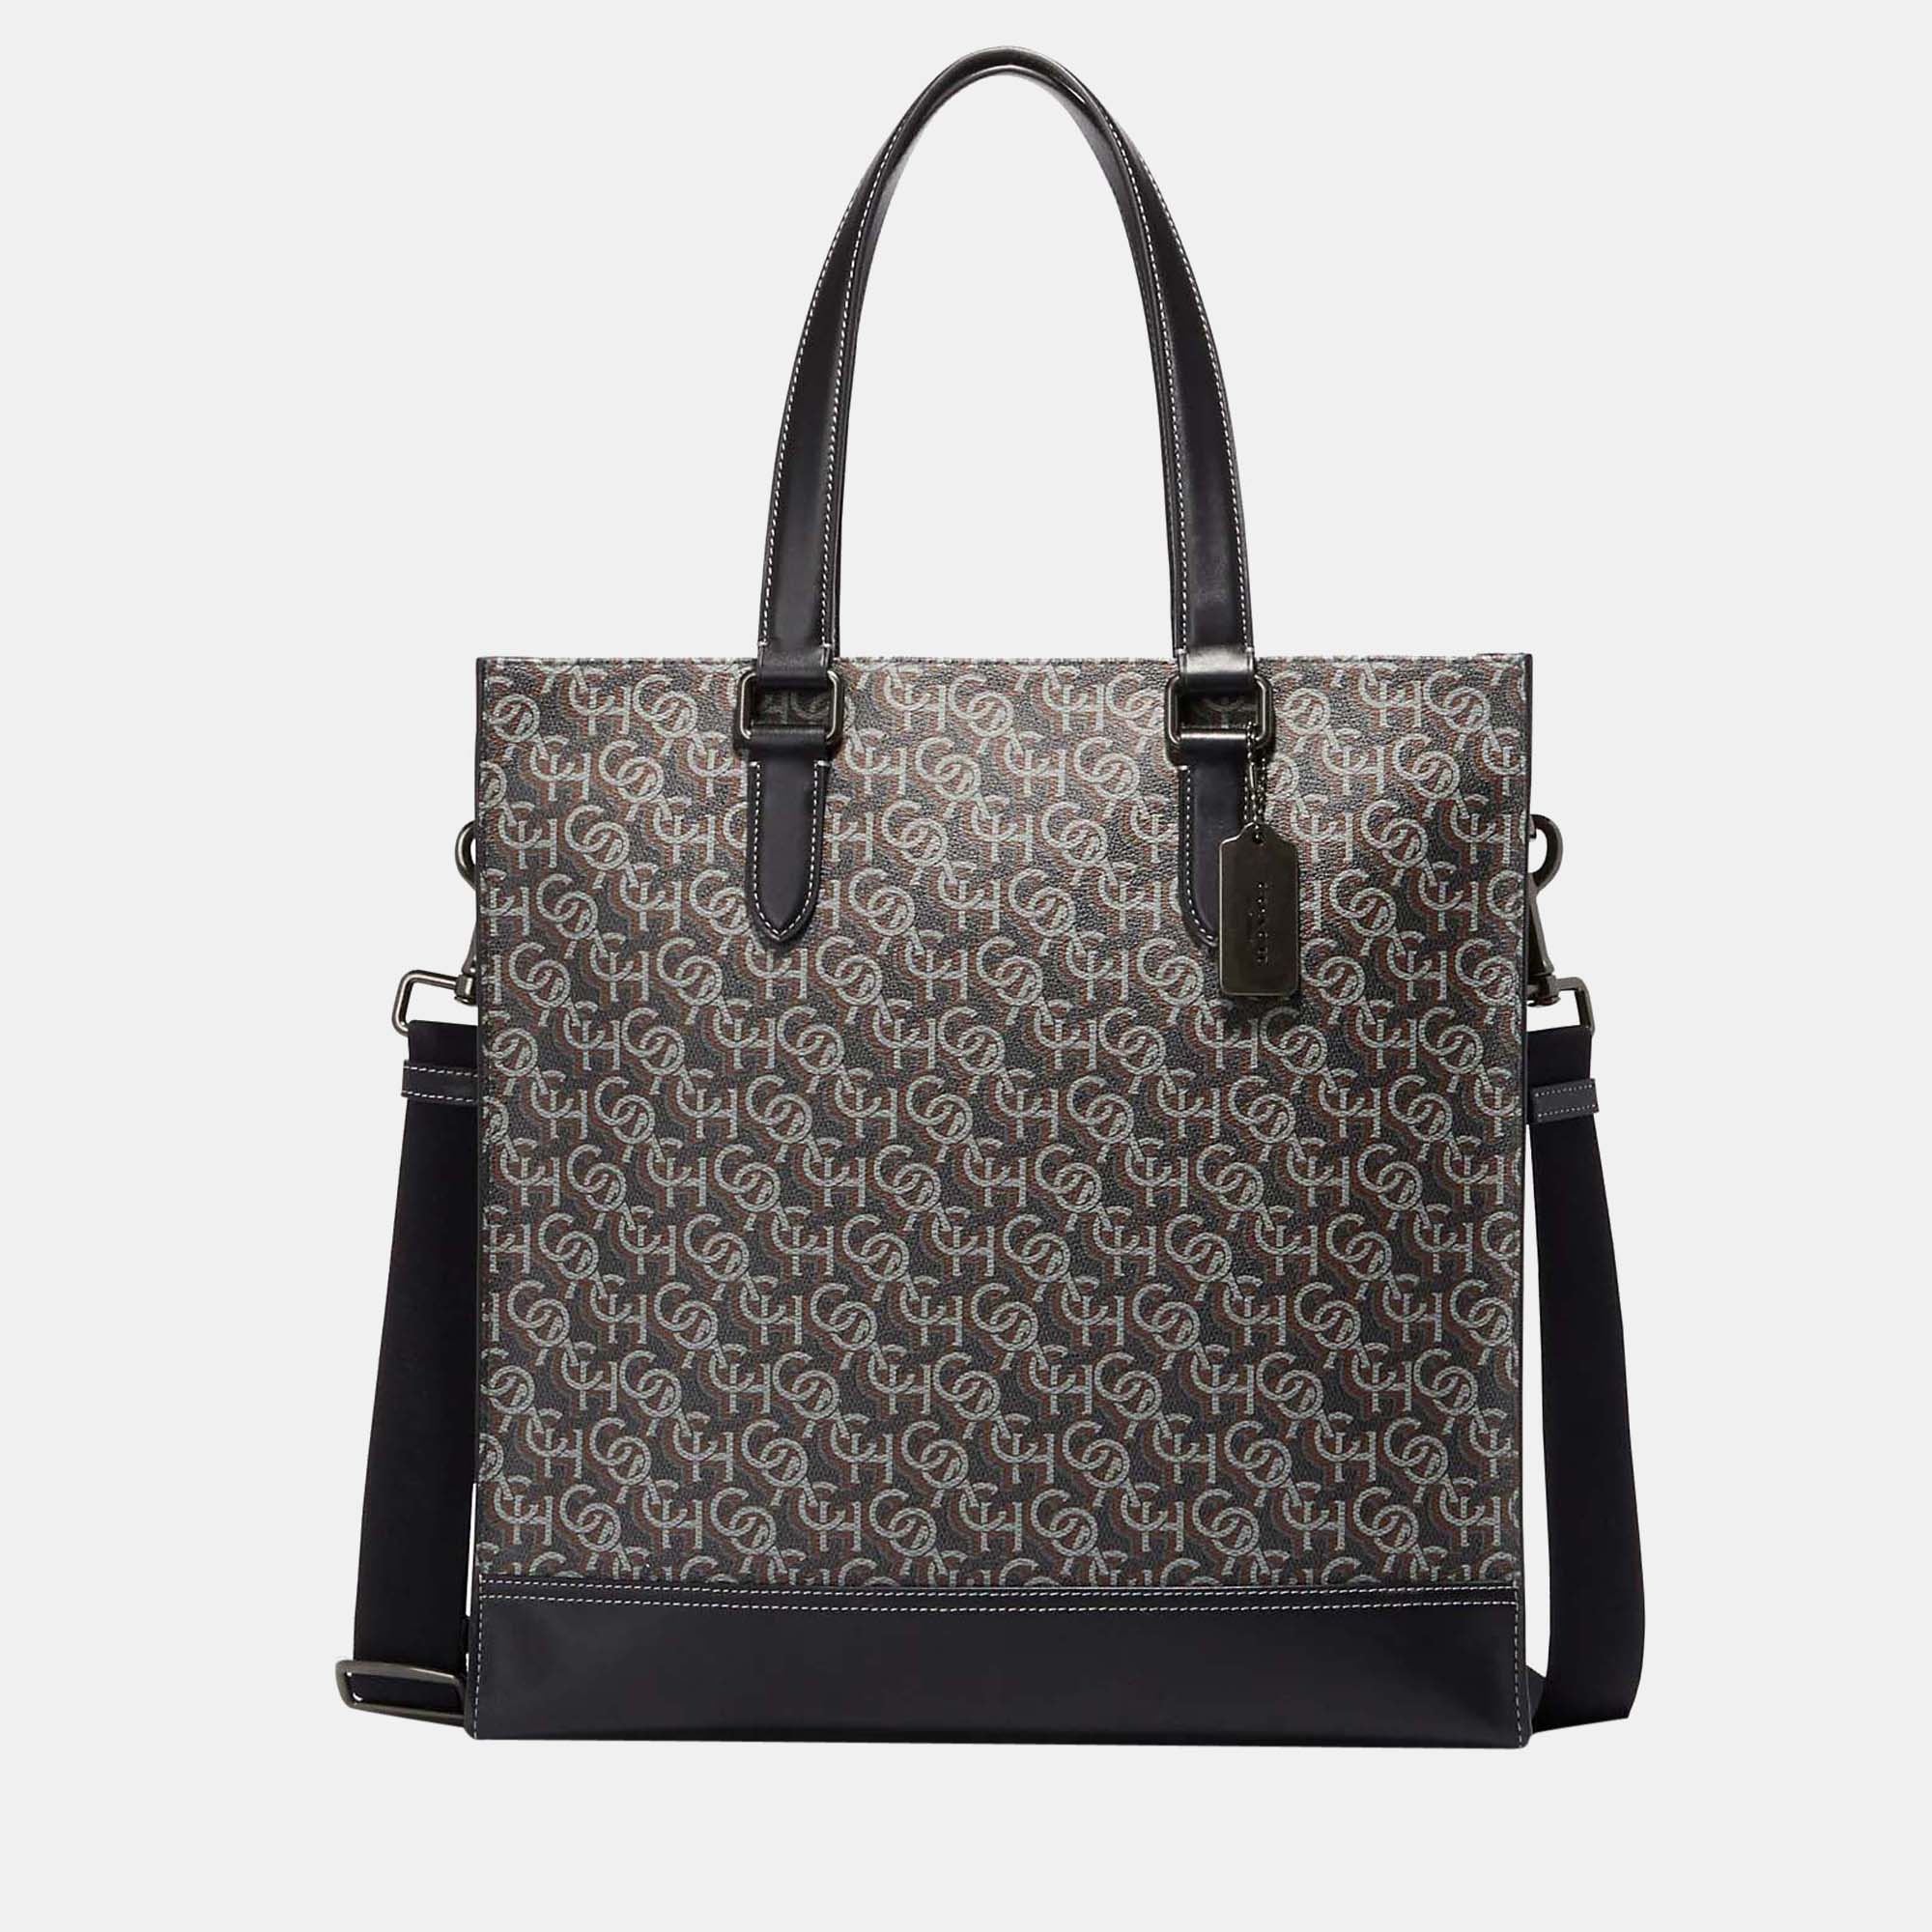 Coach Black Multicolor - Printed Coated Canvas And Leather - Tote Bag